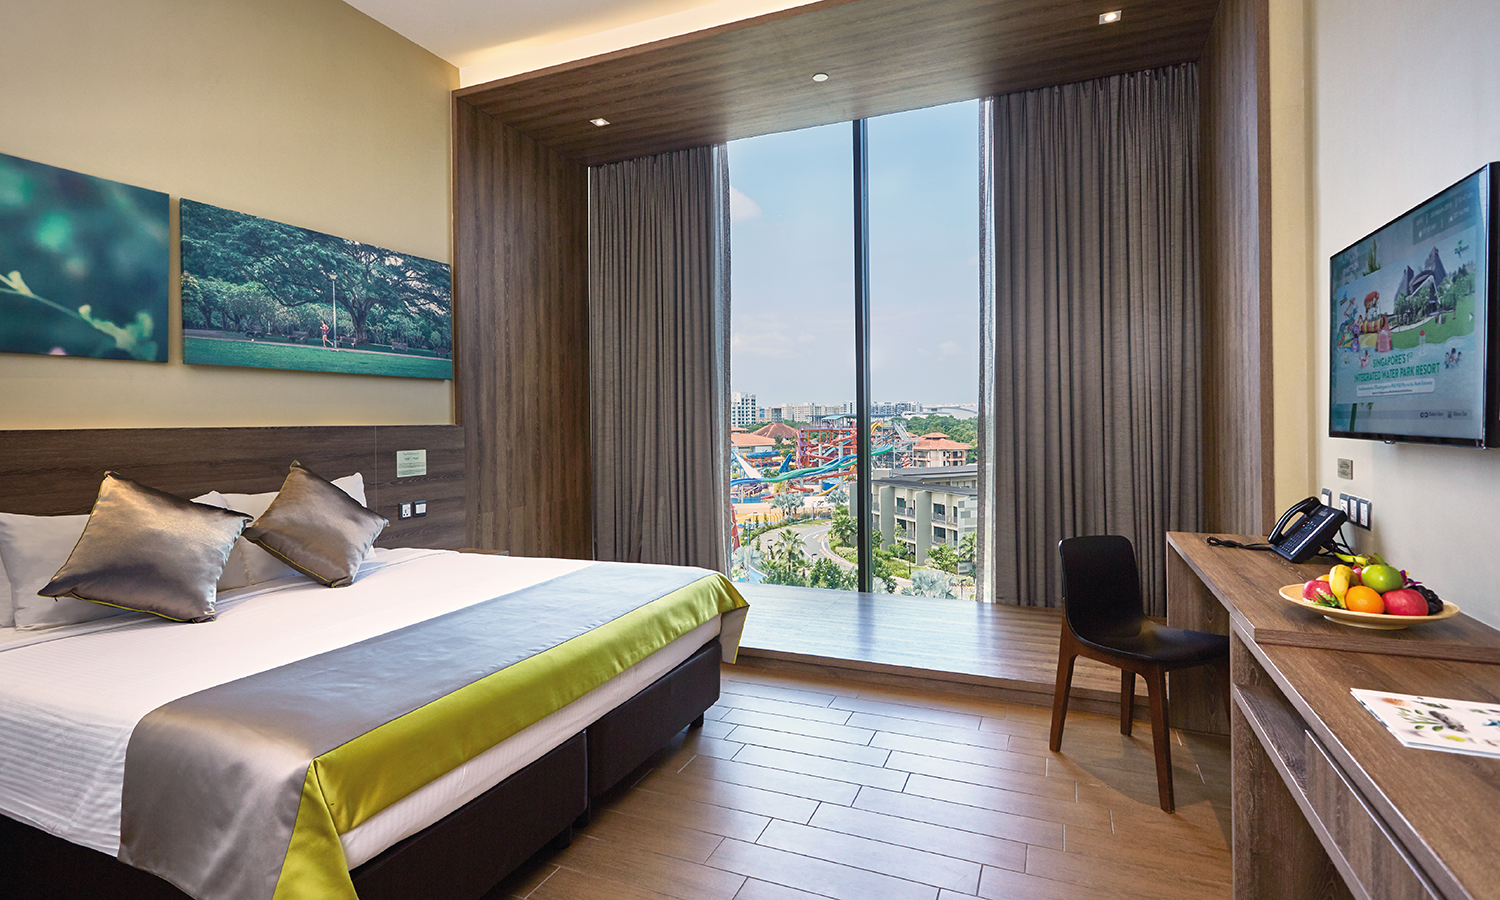 Rainforest Room for staycation at D'Resort Singapore